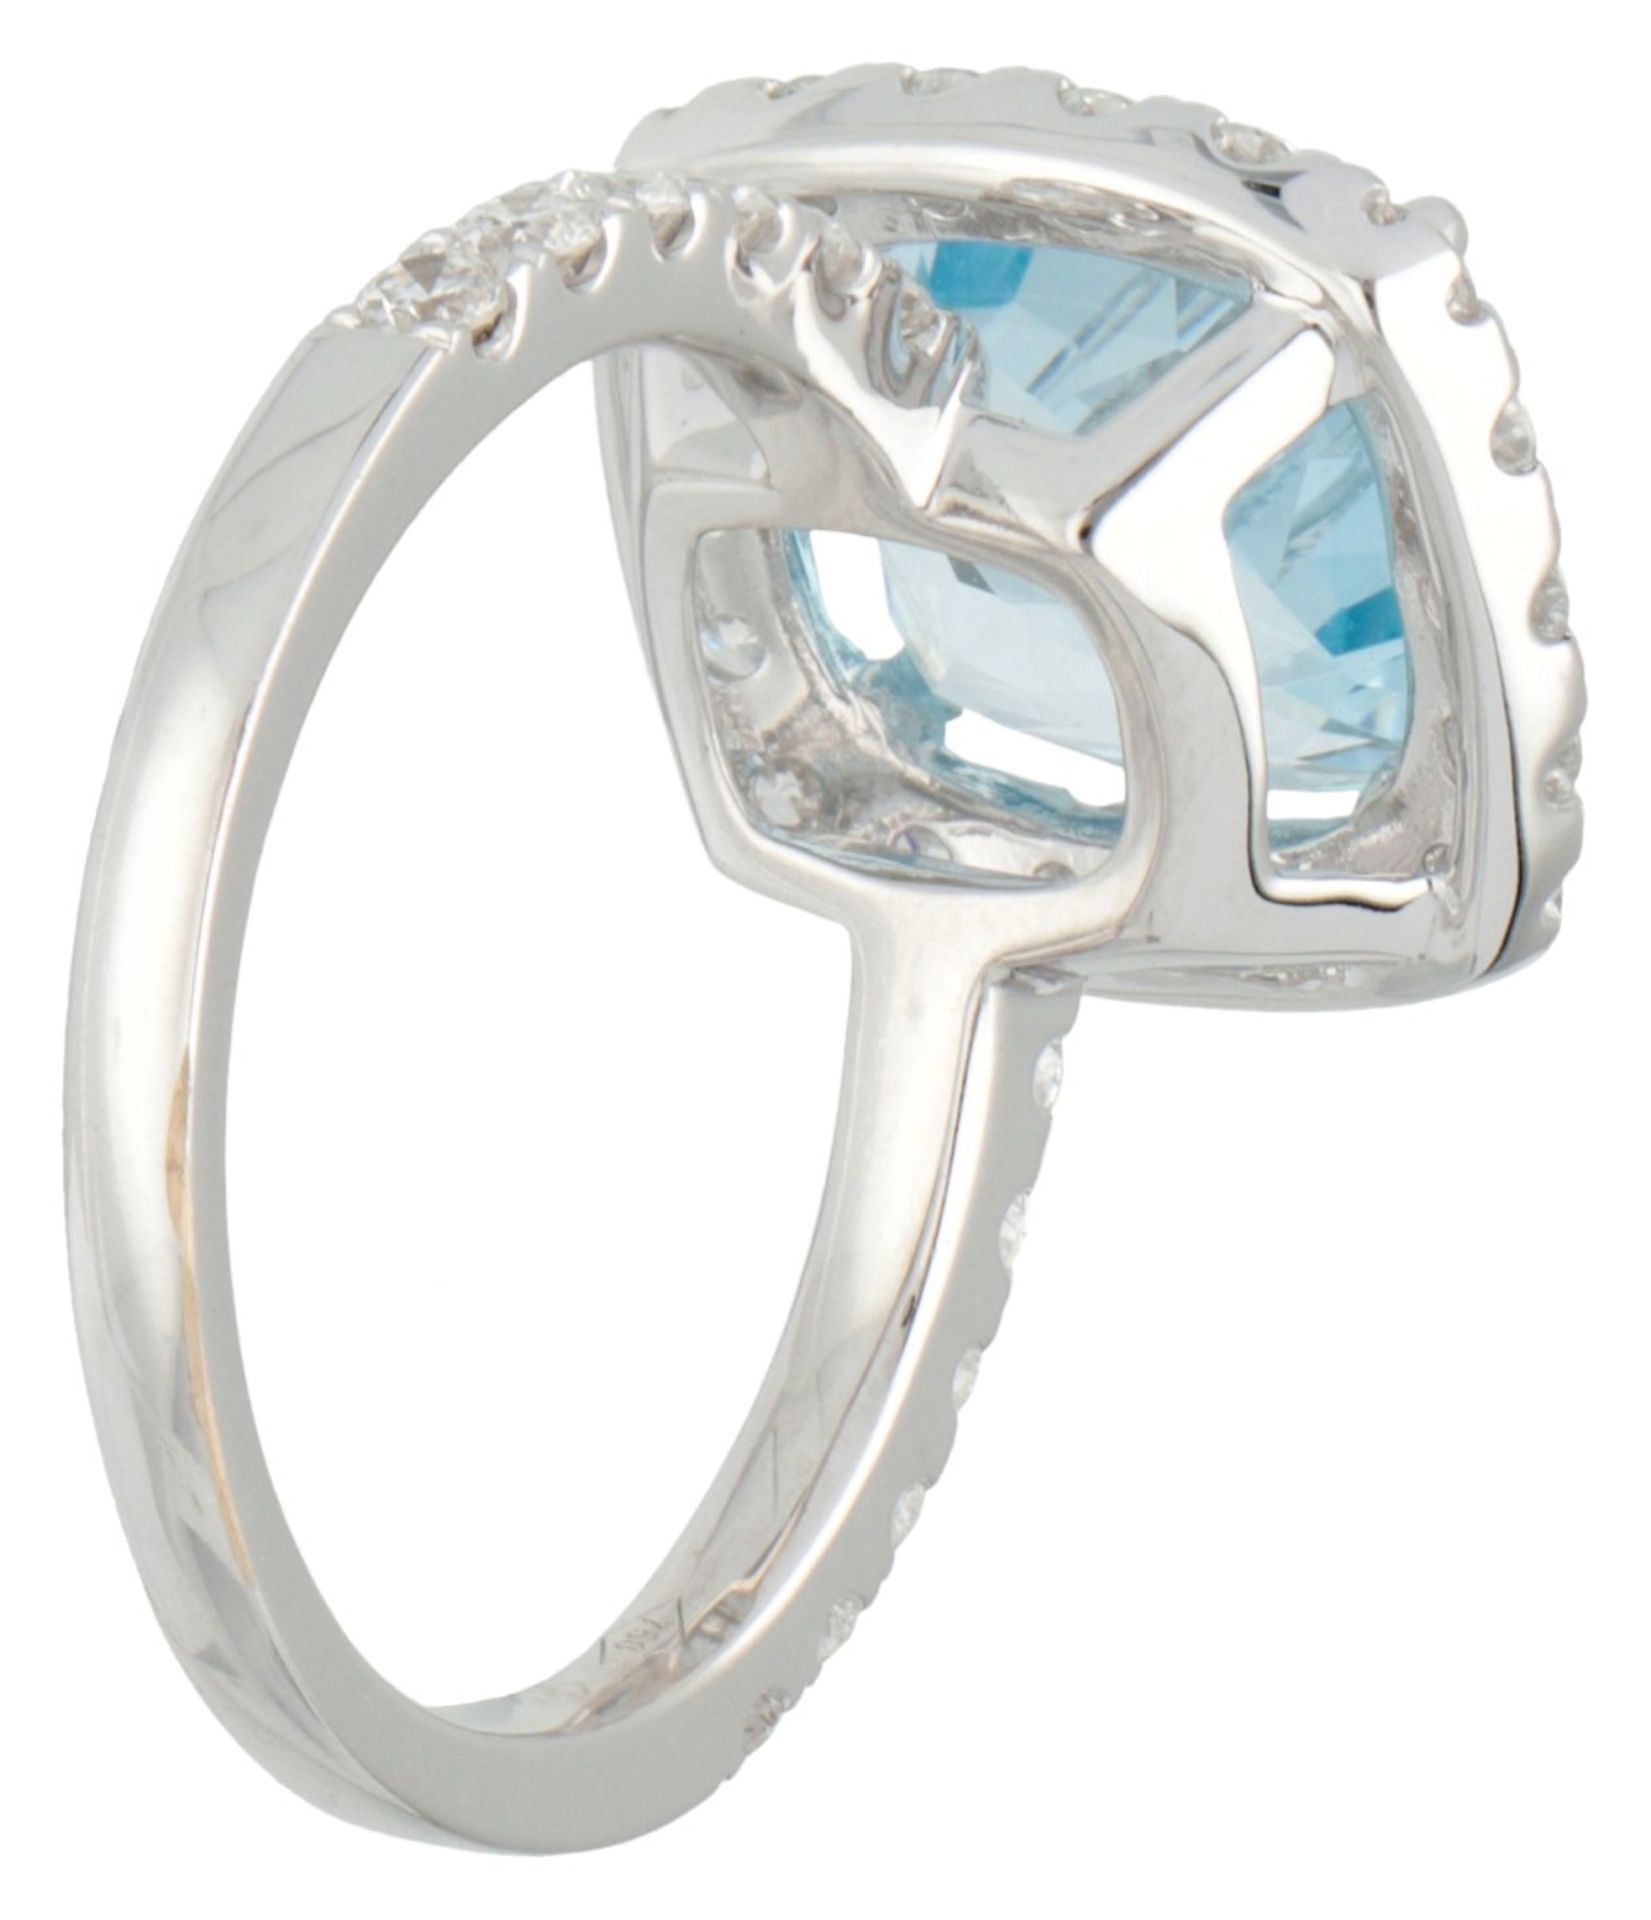 18K. White gold entourage ring set with approx. 3.53 ct. sky blue topaz and approx. 0.60 ct. diamond - Image 3 of 3